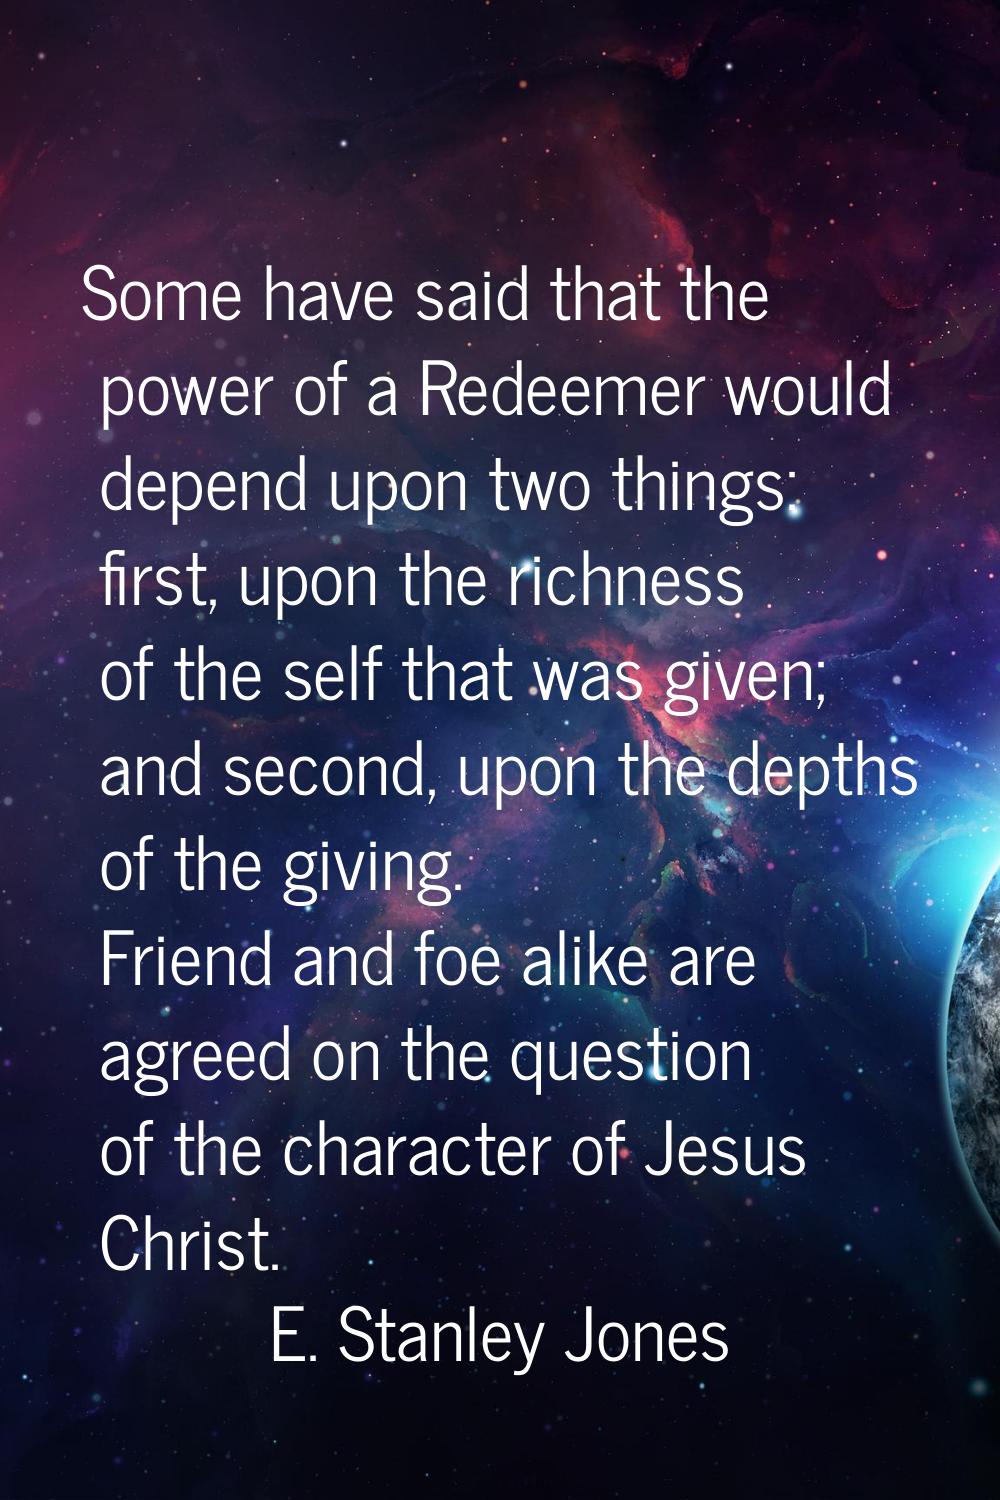 Some have said that the power of a Redeemer would depend upon two things: first, upon the richness 